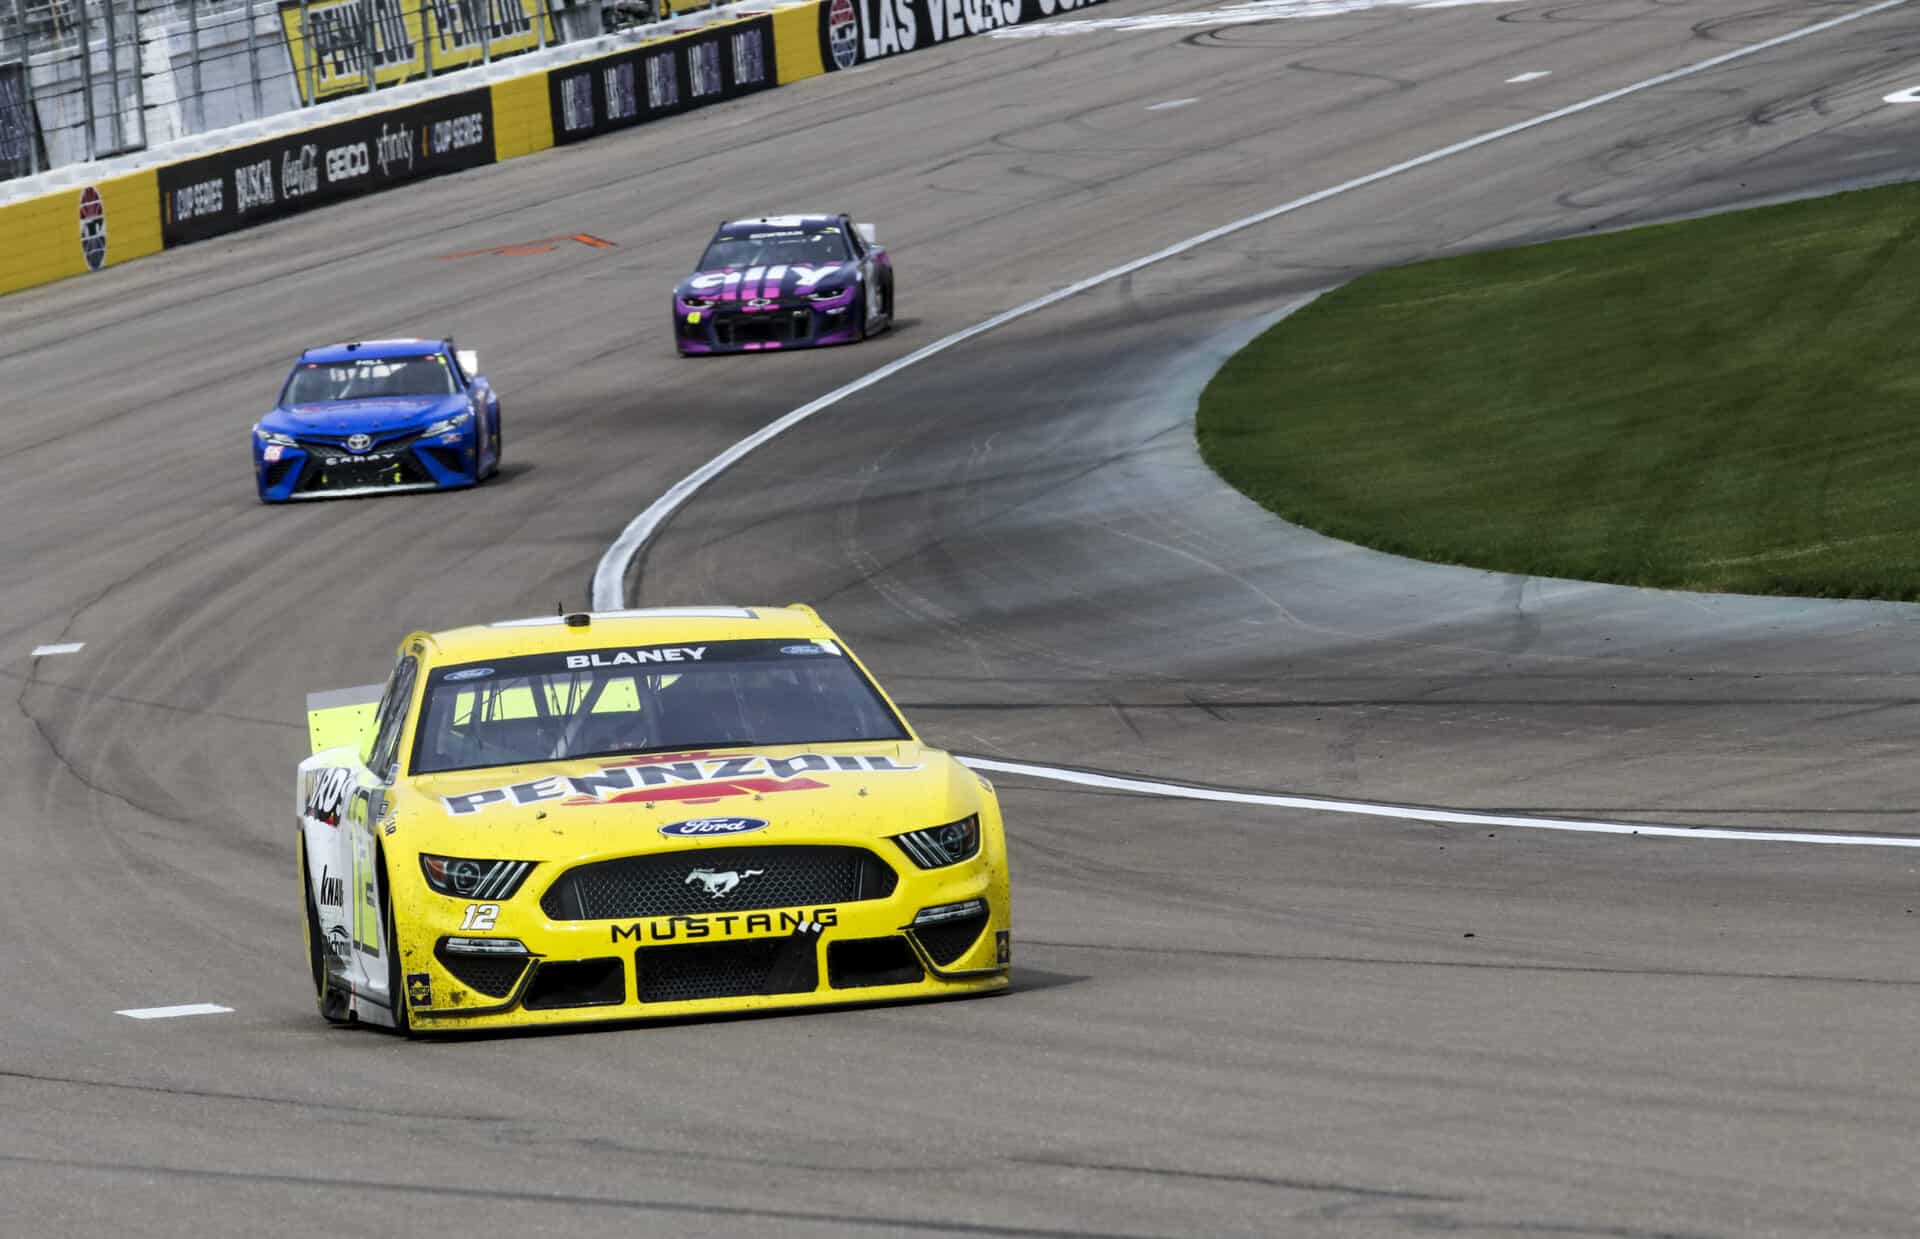 Ryan Blaney races his NASCAR Cup Series Ford Mustang at Las Vegas Motor Speedway in the 2021 Pennzoil 400 Presented by Jiffy Lube. Photo by Rachel Schuoler / Kickin' the Tires